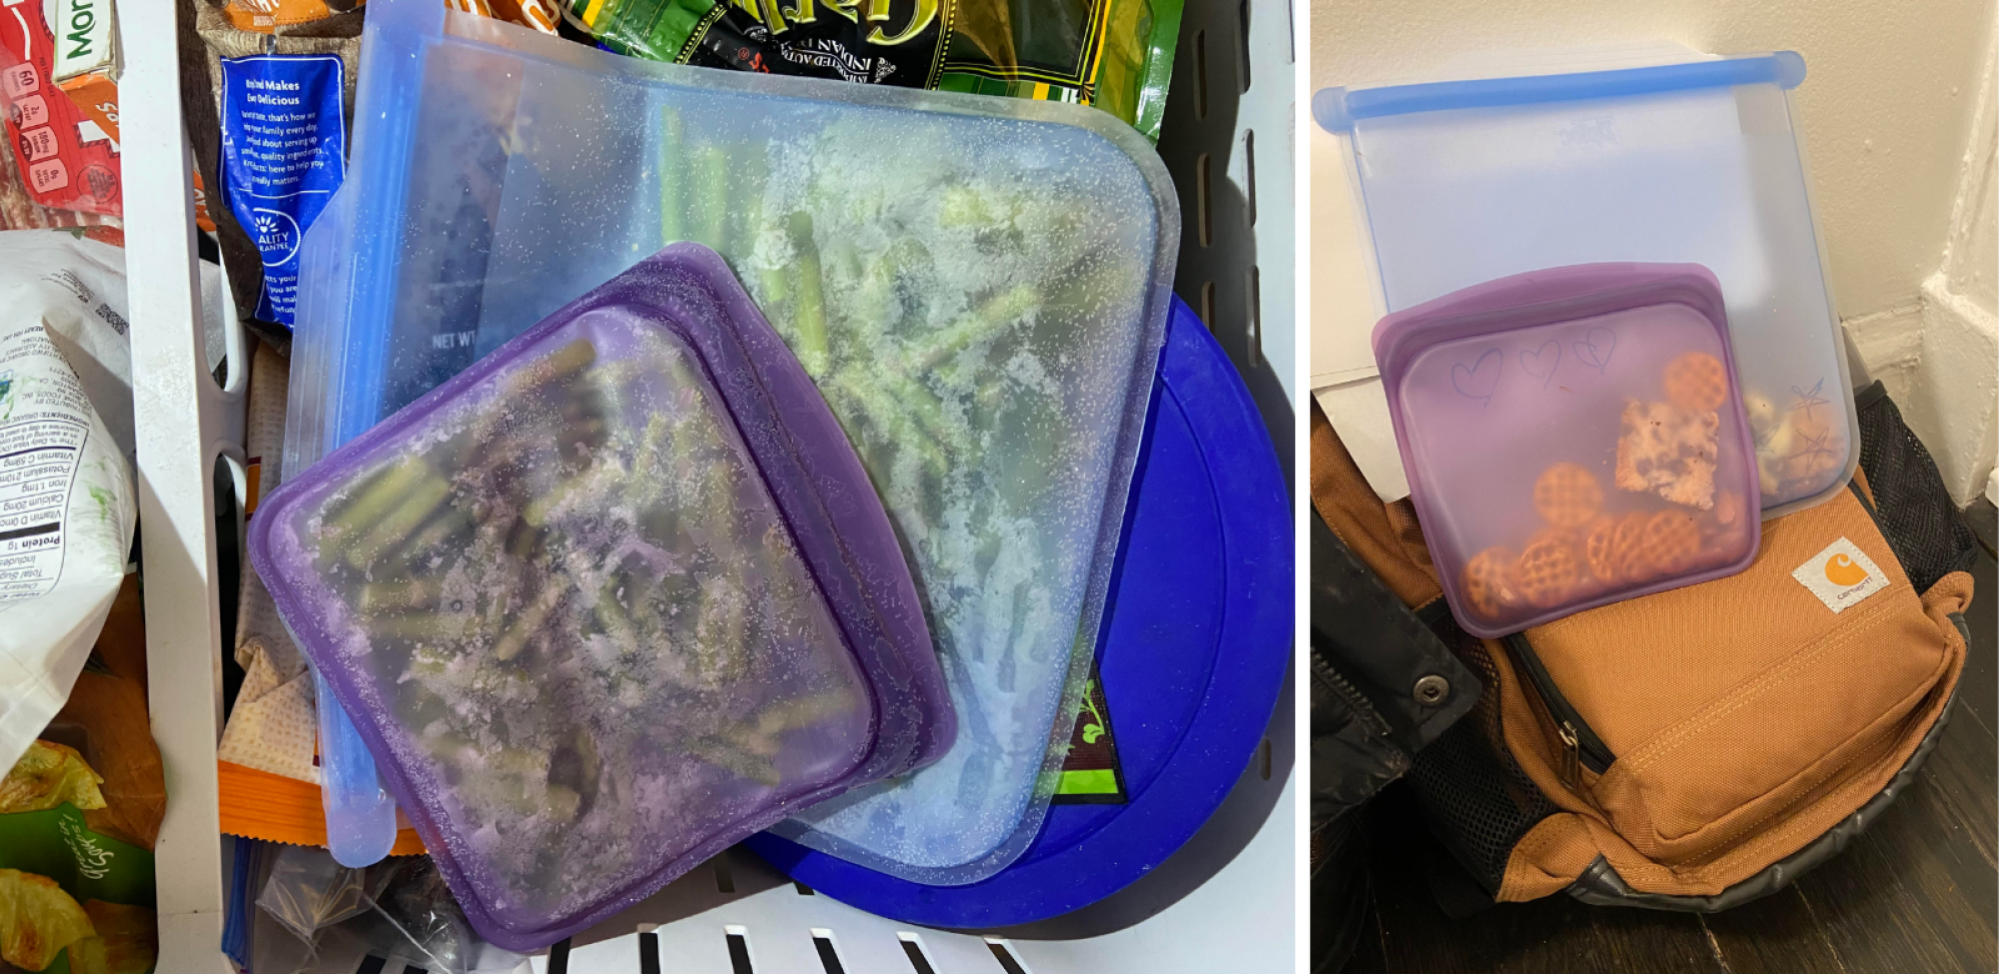 a top down view of silicone bags filled with asparagus in a freezer and silicone bags filled with snacks on a backpack